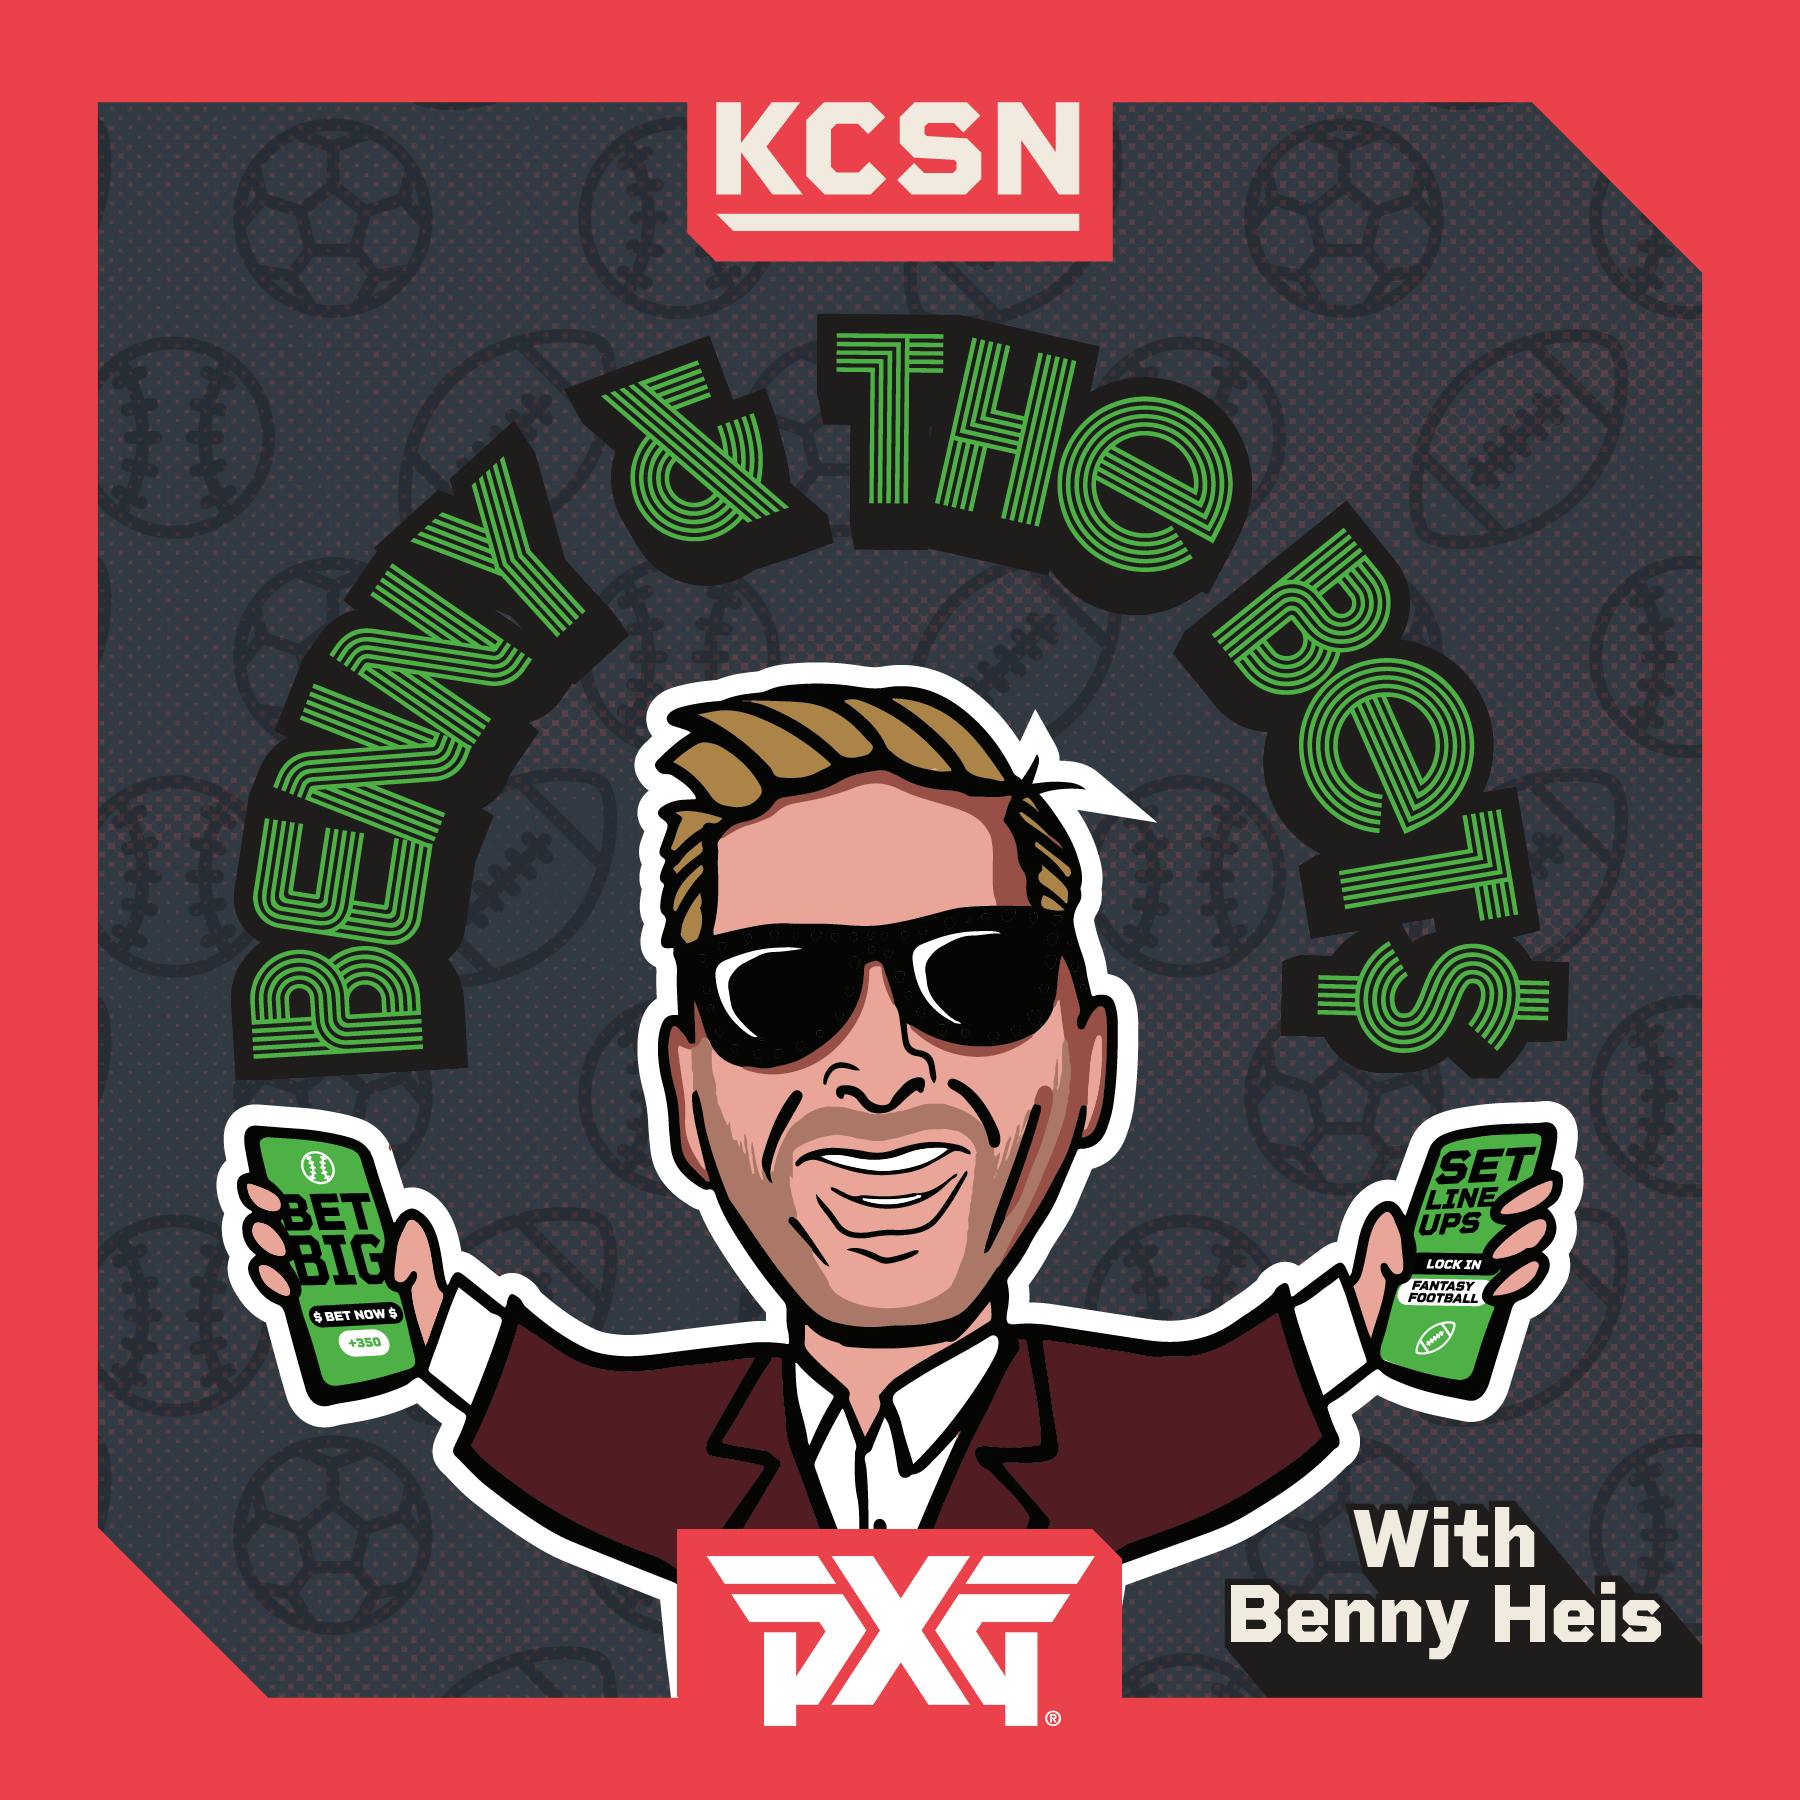 Benny and the Bets 12/15: Benny Heis Gives Best Bets for Chiefs vs. Patriots!